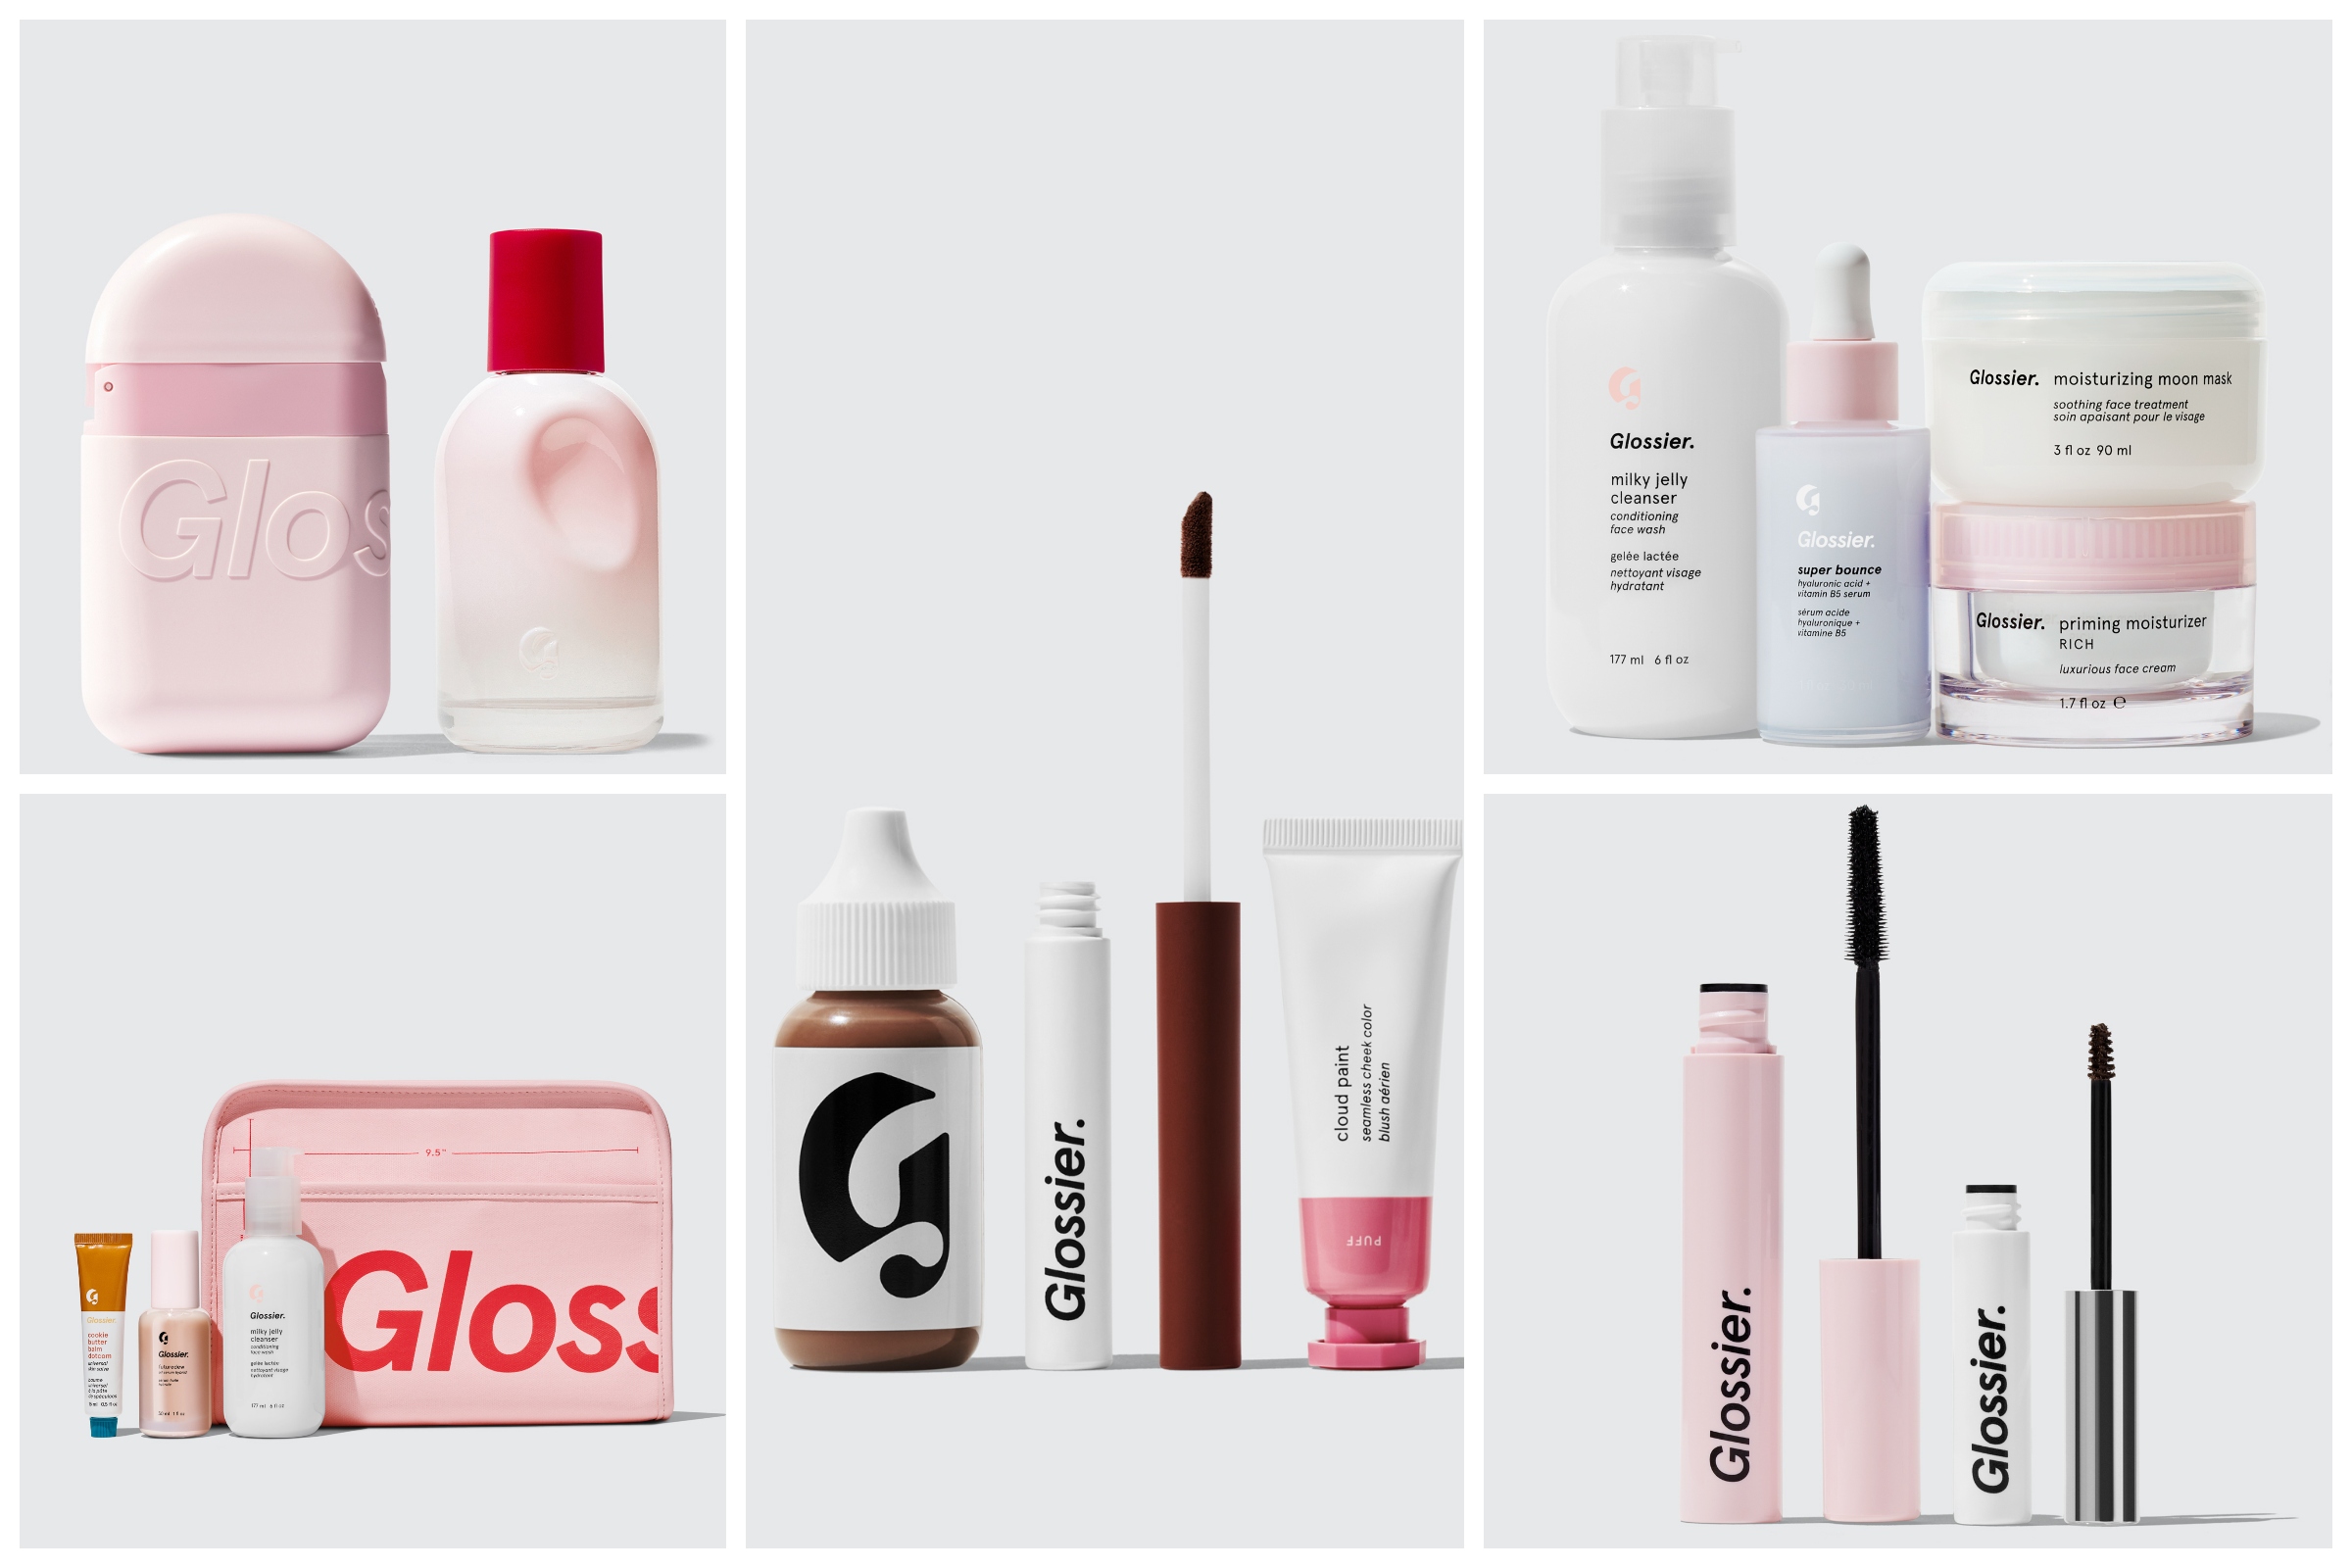 Glossier Black Friday Deal: Get 20% Makeup, Skincare and More